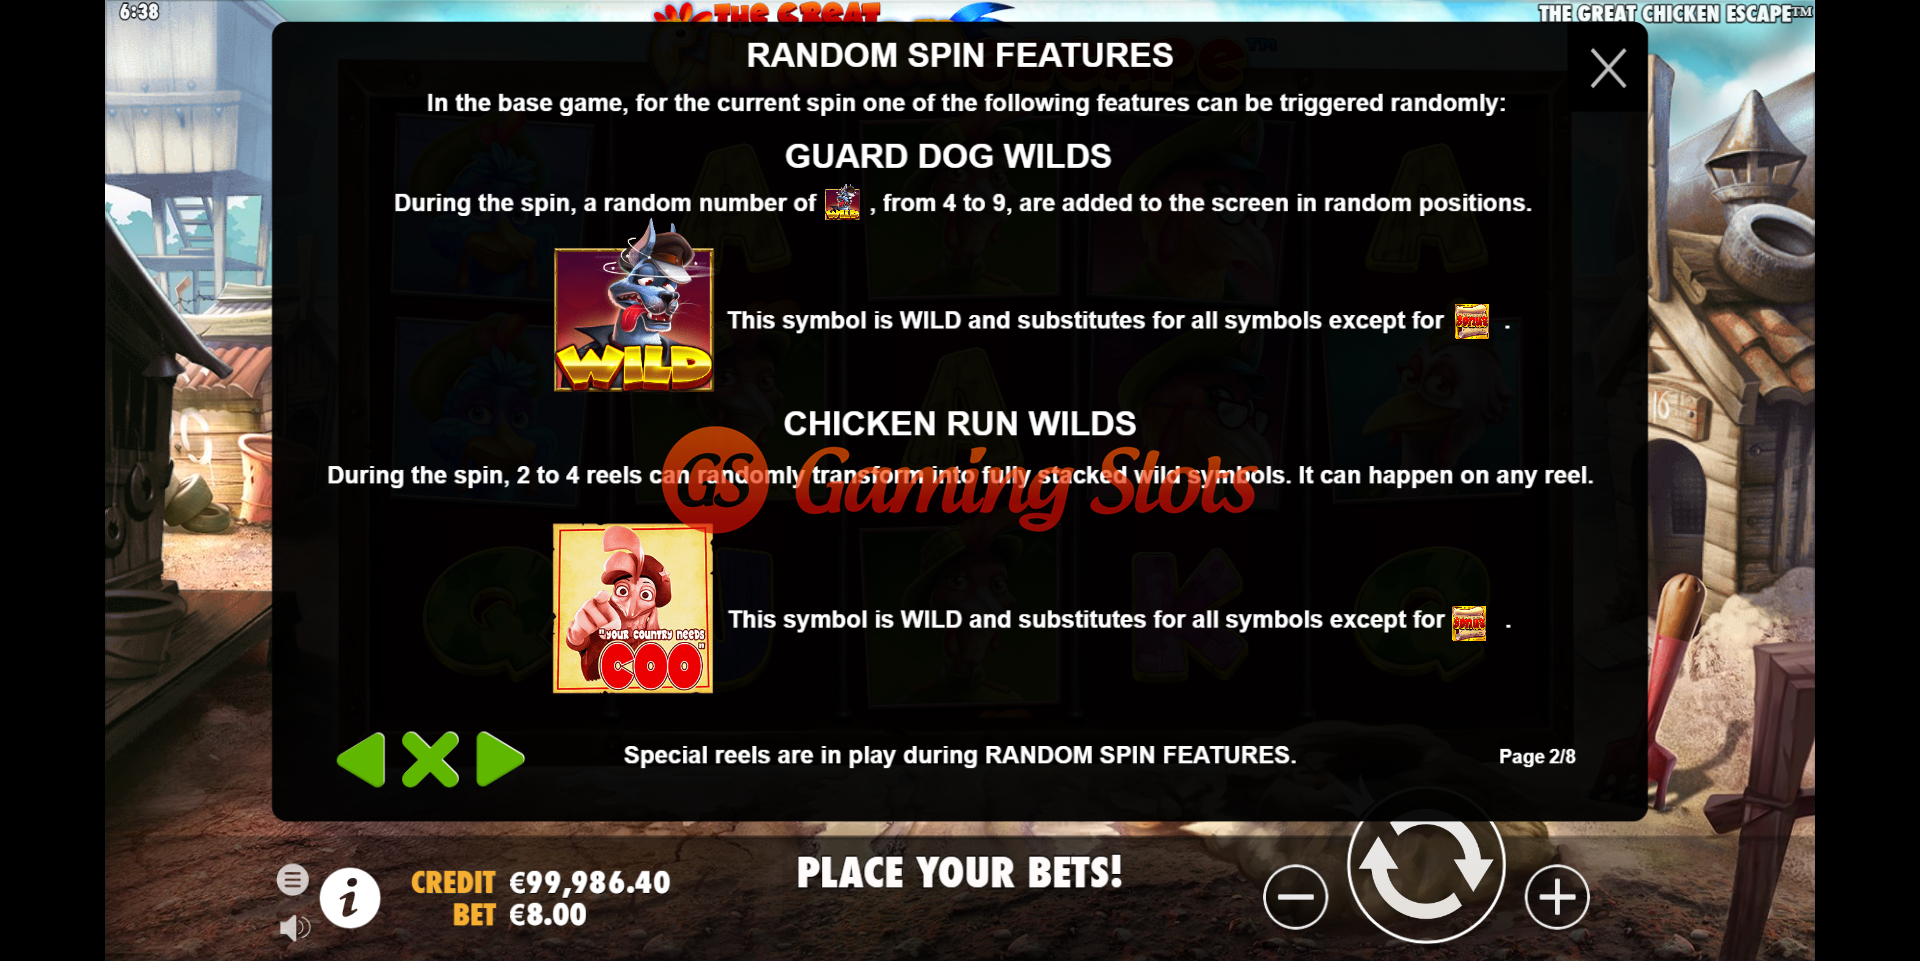 Pay Table for The Great Chicken Escape slot from Pragmatic Play